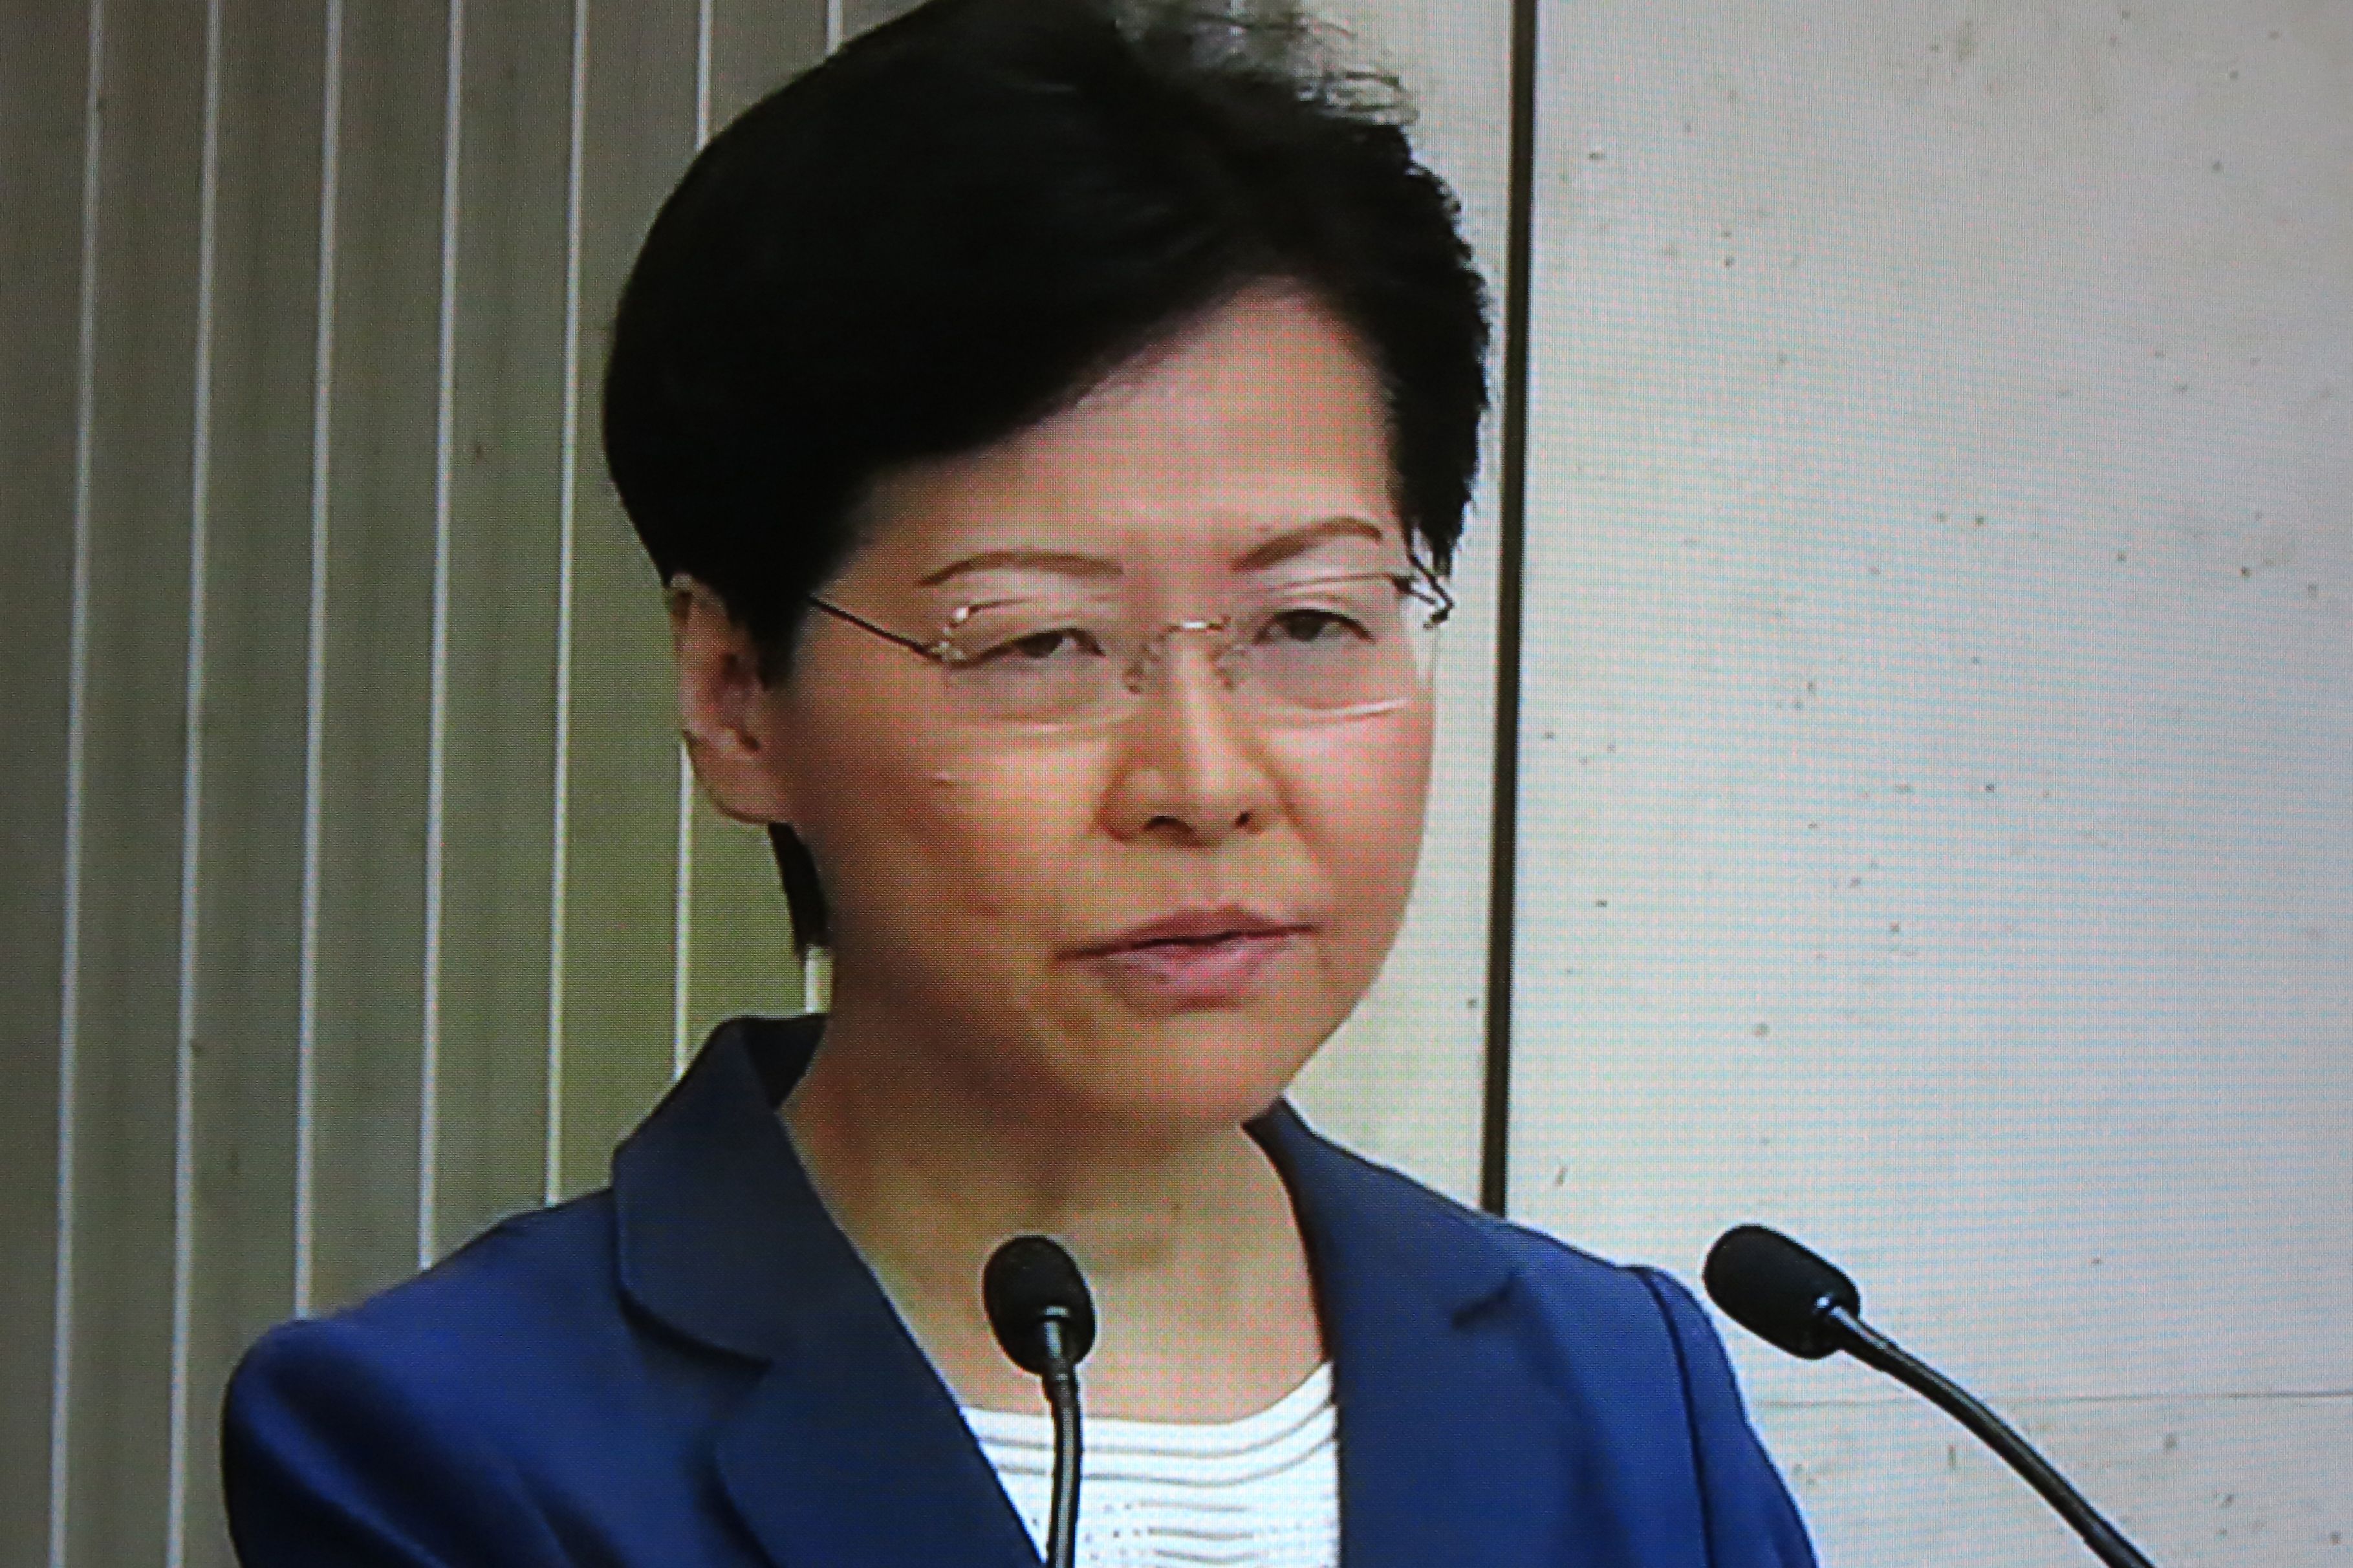 Hong Kong's Chief Executive Carrie Lam speaking during a press conference on Tuesday.